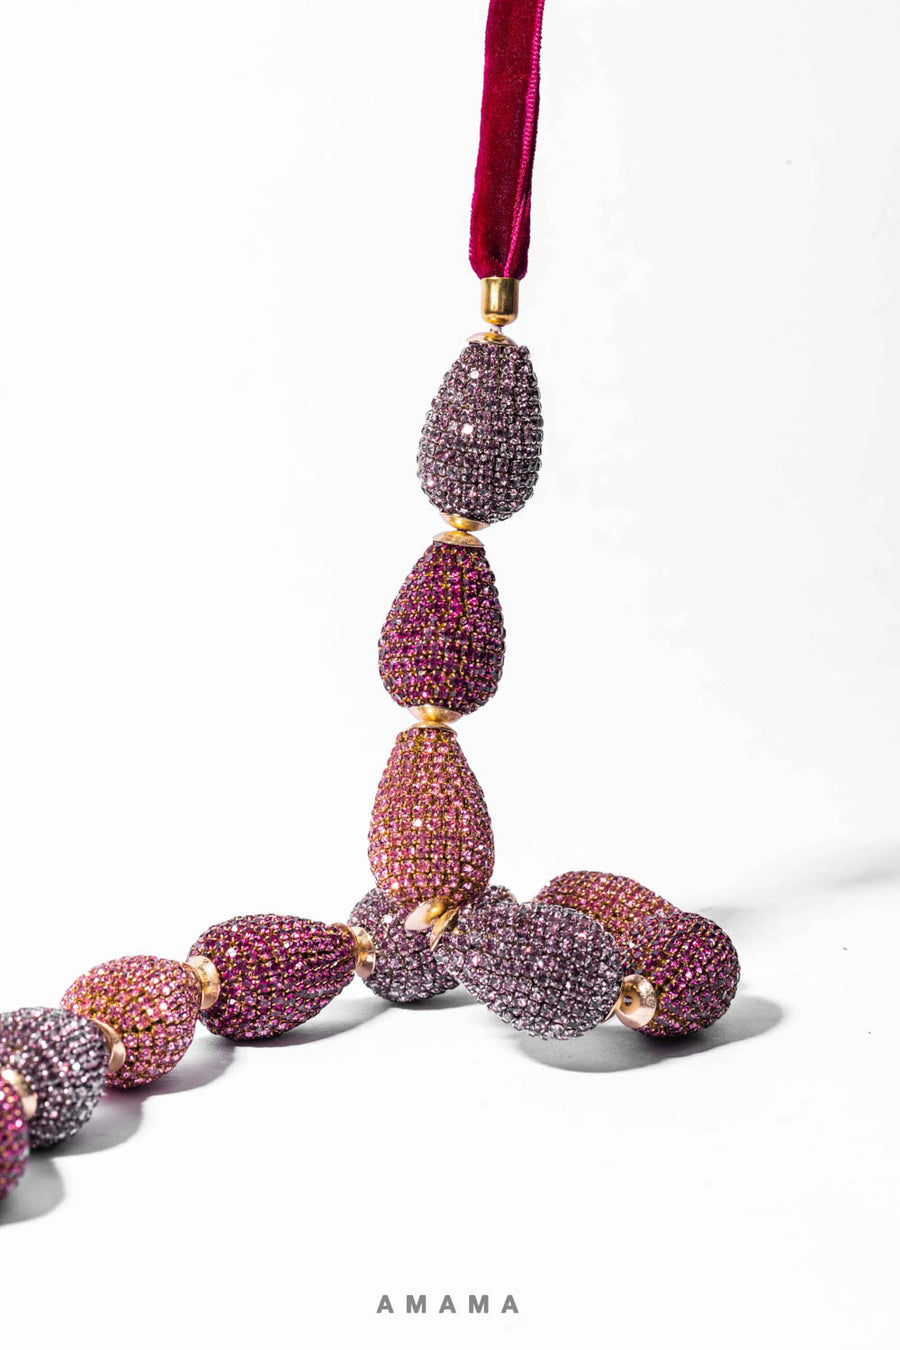 Thin Pyrus Necklace in Pink Ombre Amama